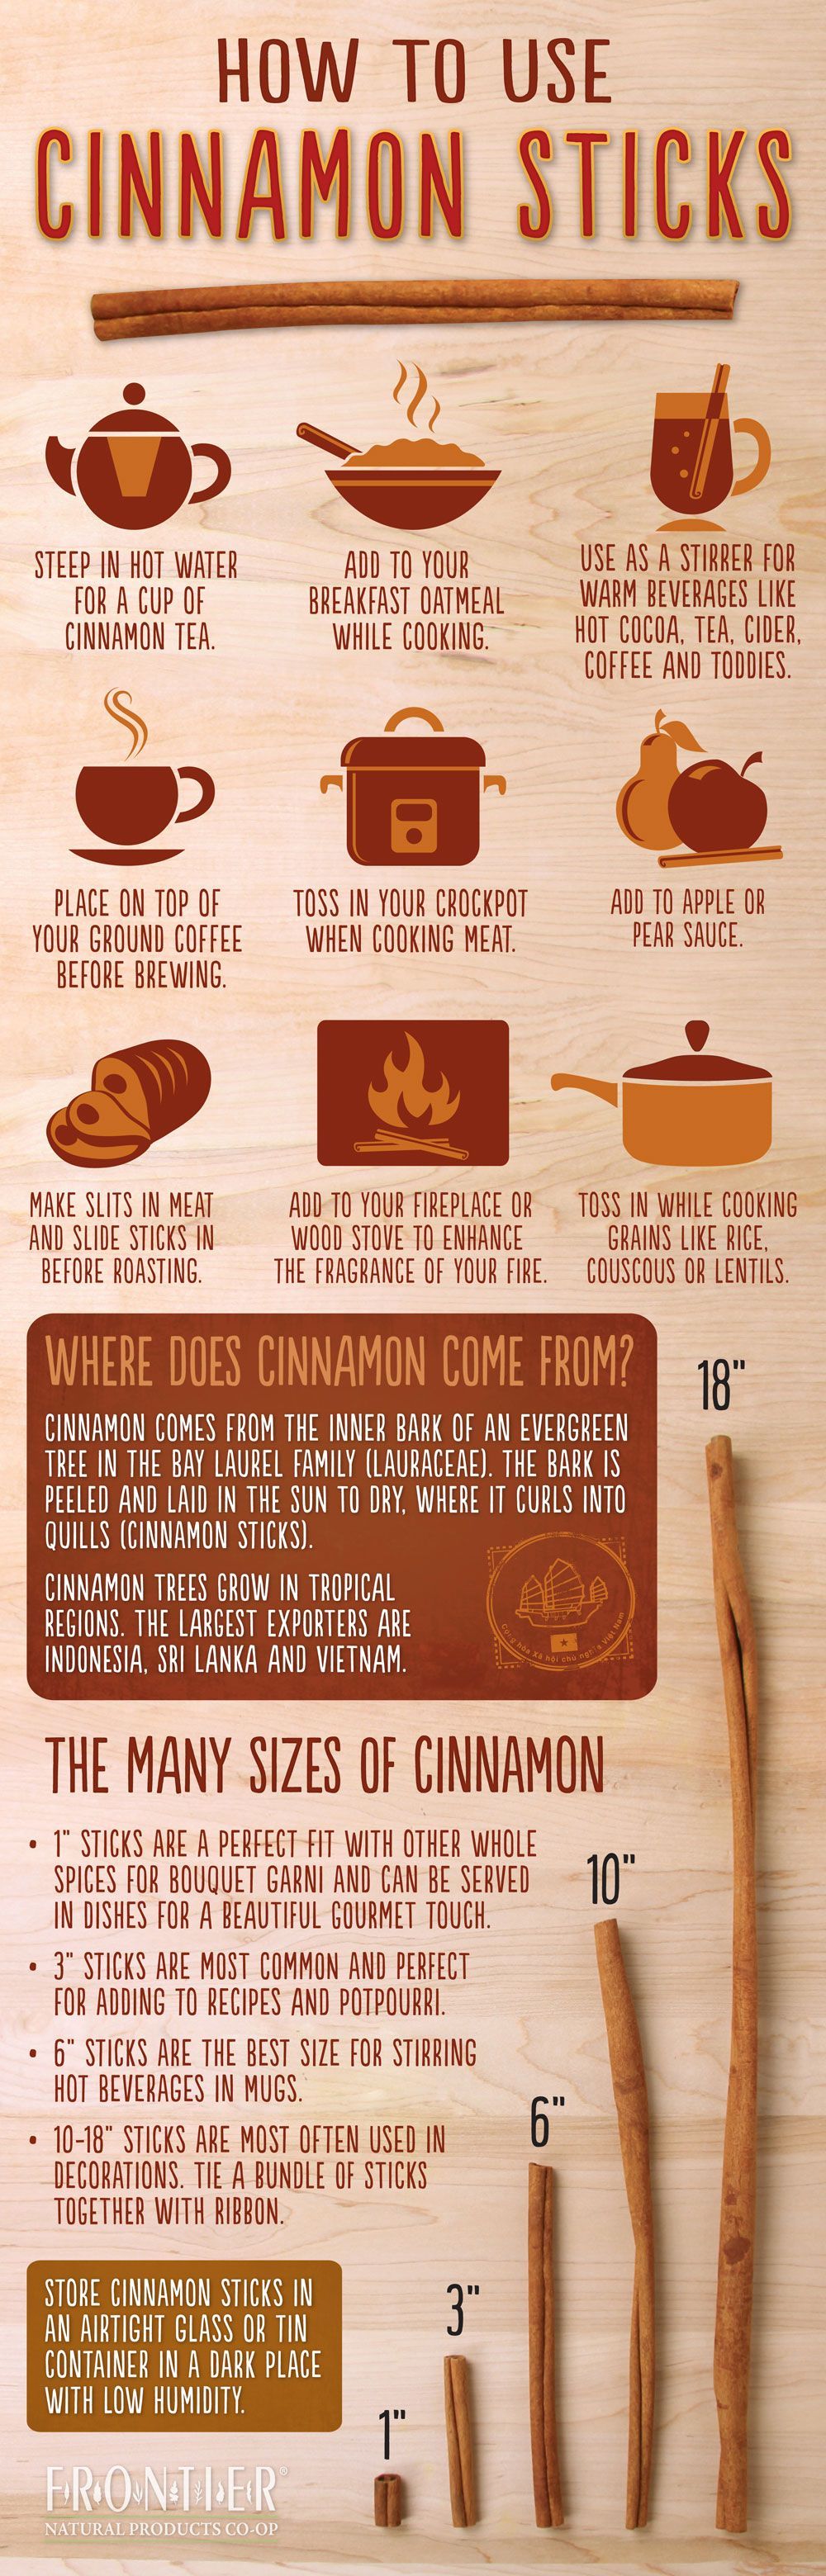 HOW TO USE CINNAMON STICKS ~ Enjoy this cool infographic detailing uses of this wonderfully healthy spice.